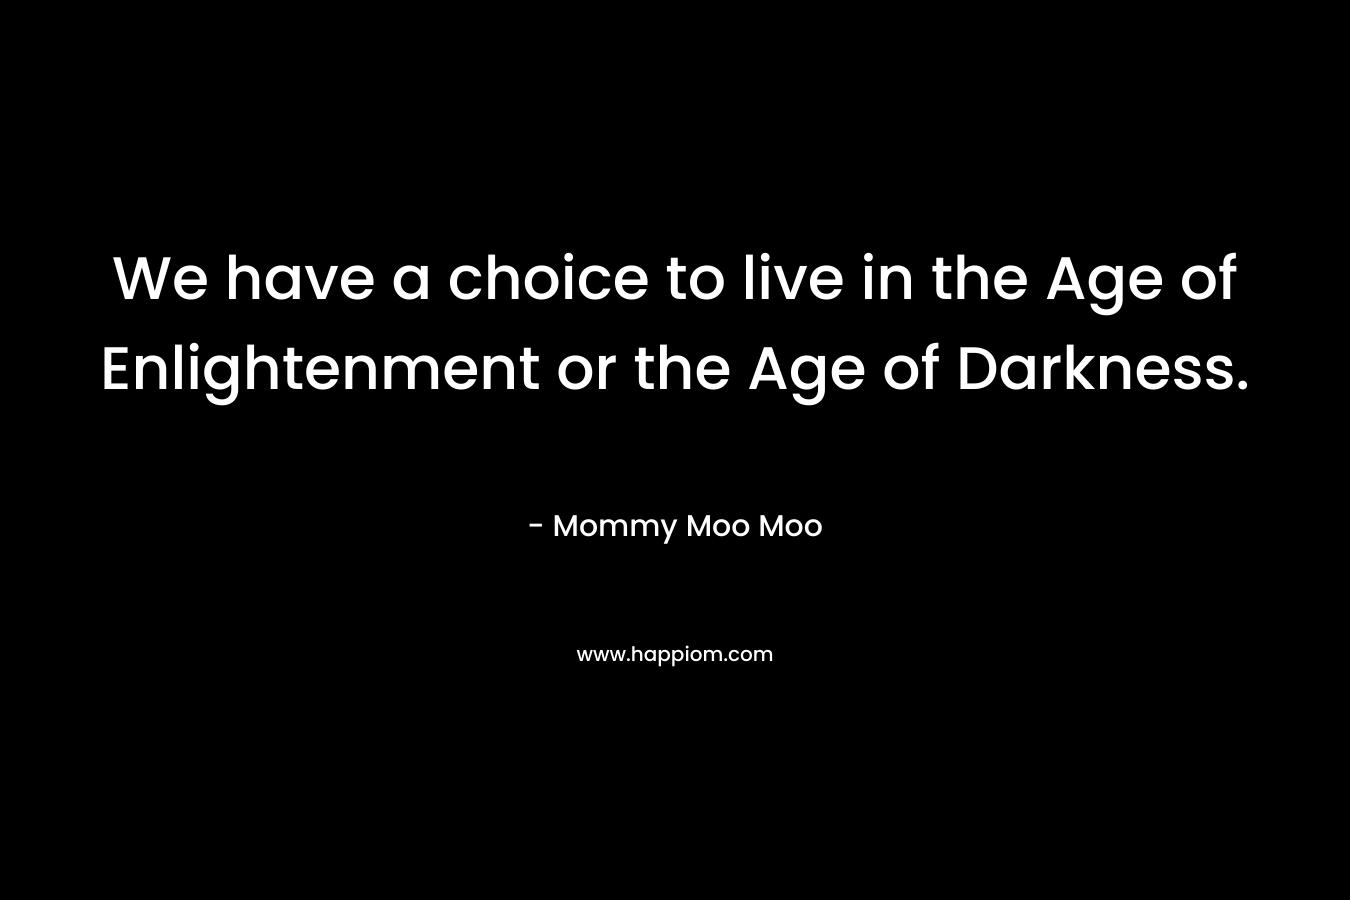 We have a choice to live in the Age of Enlightenment or the Age of Darkness.